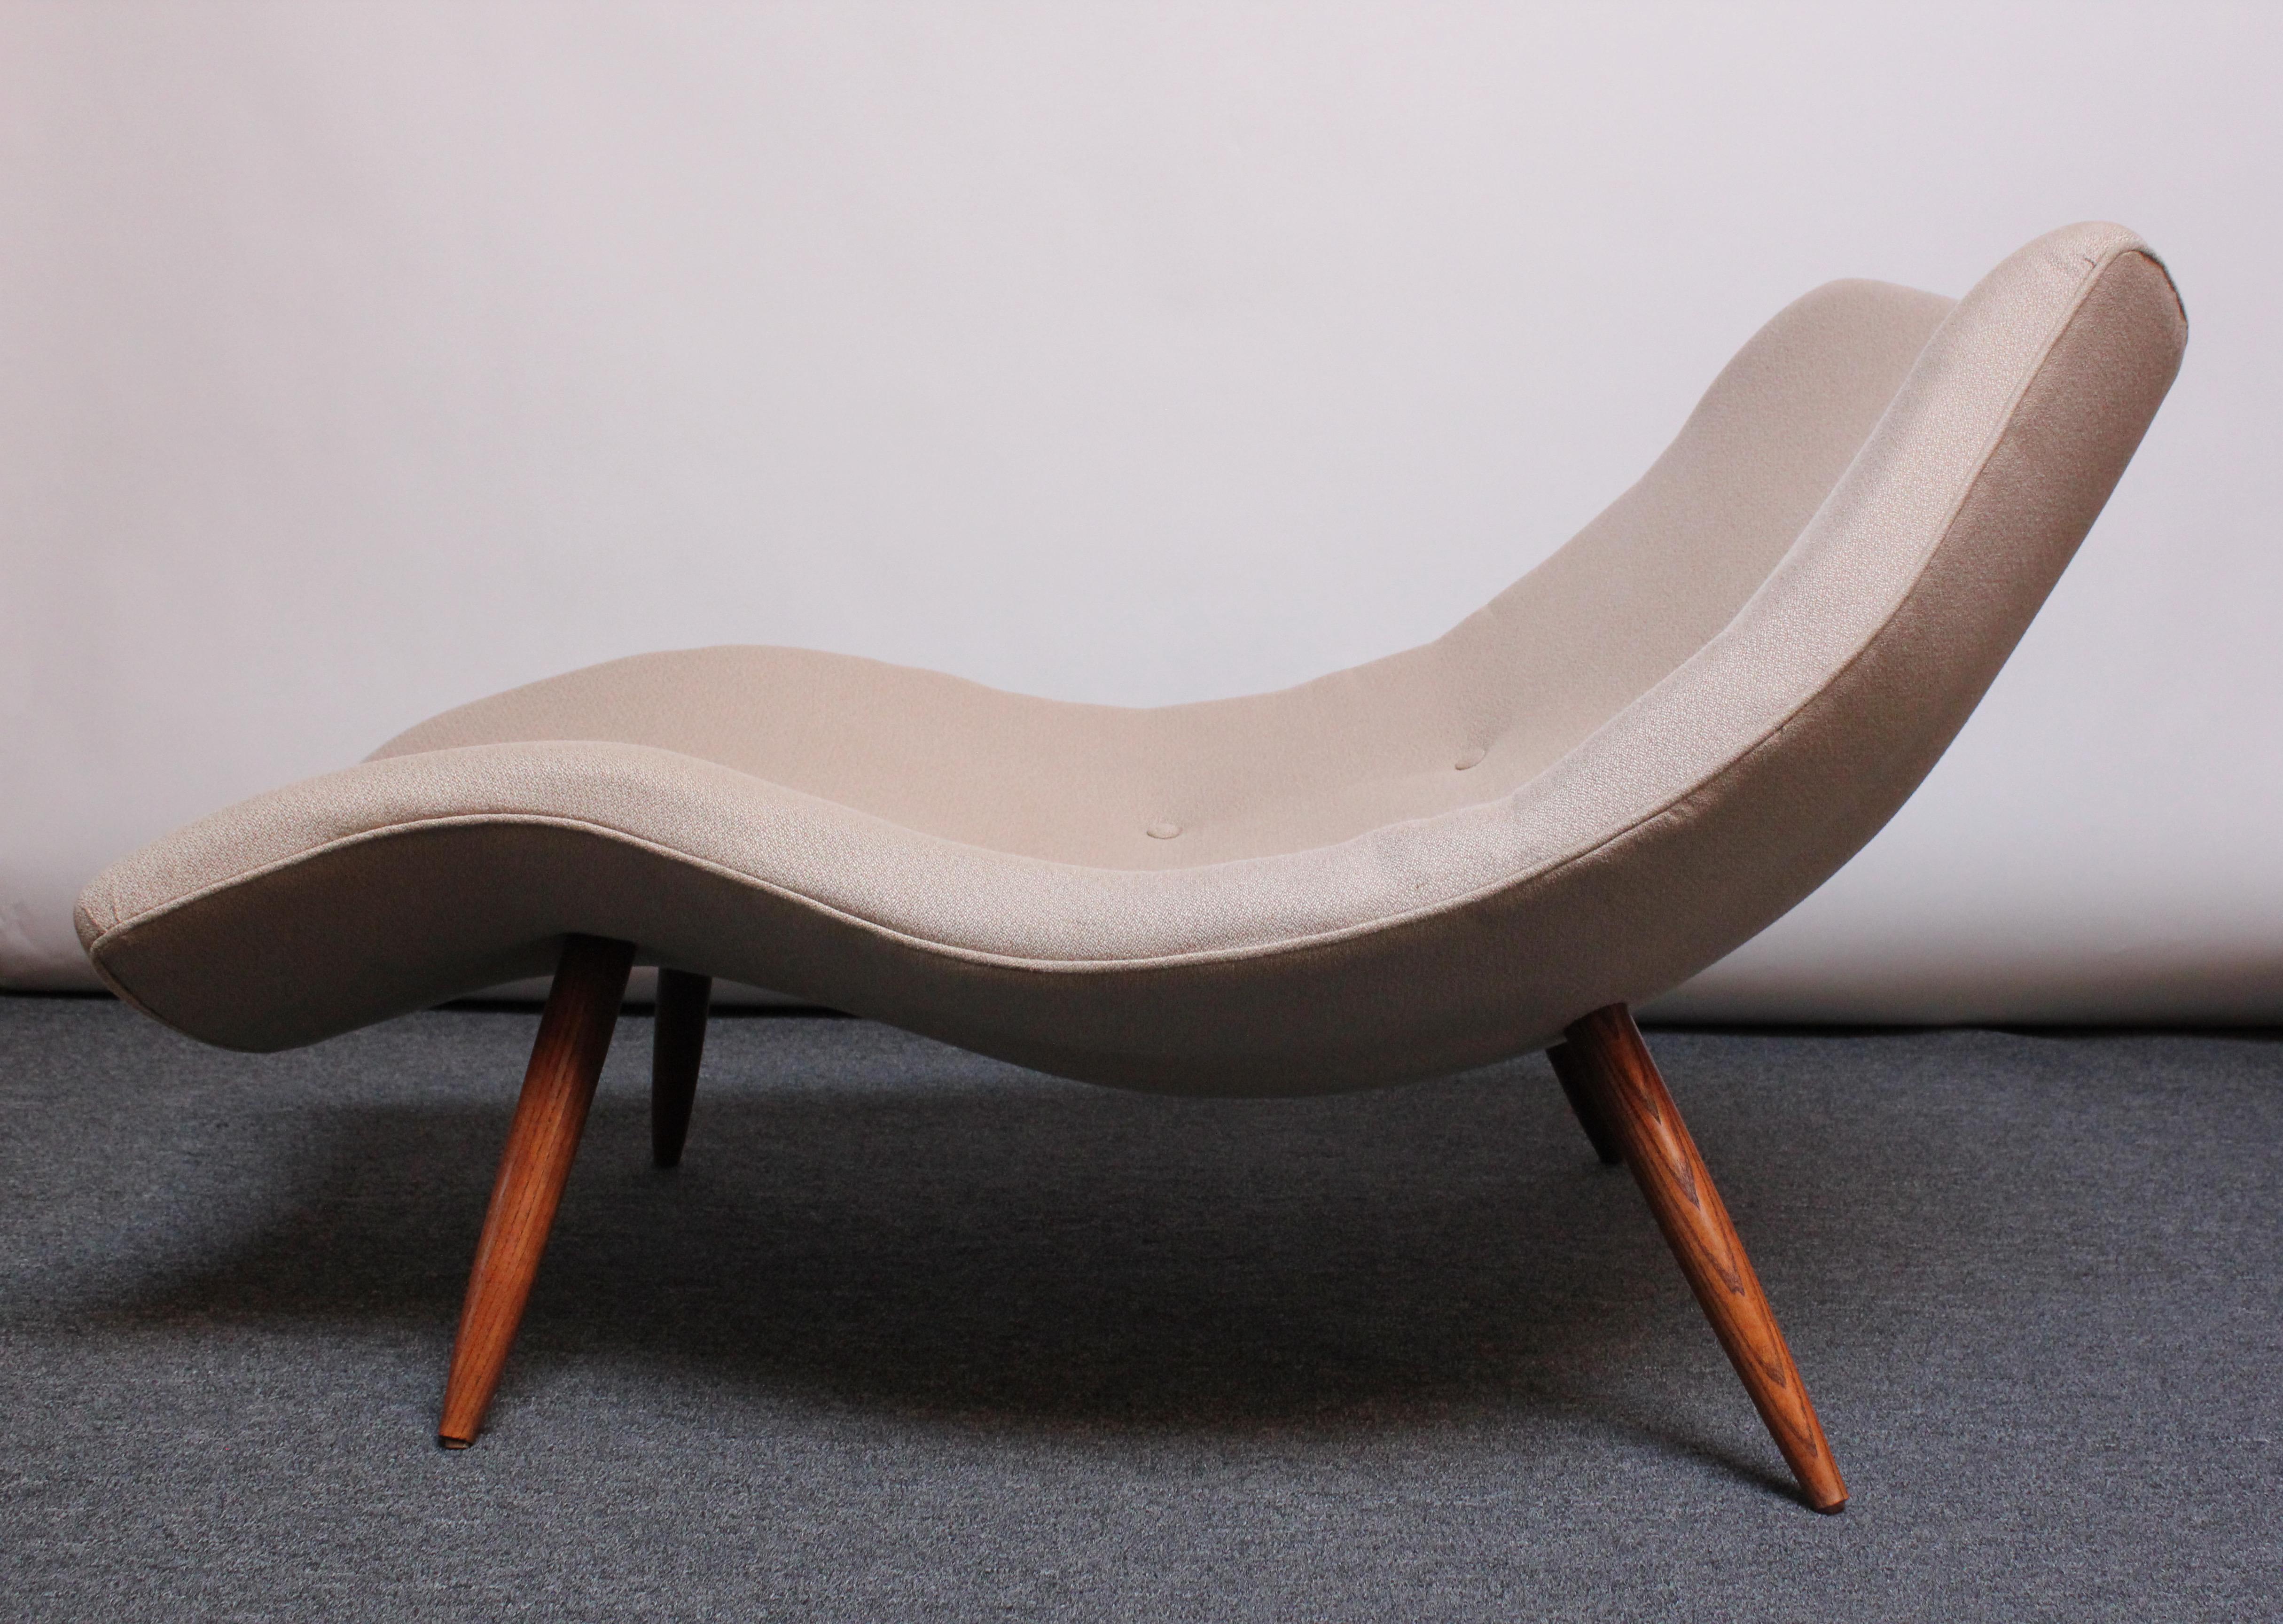 Vintage Sculptural Adrian Pearsall Chaise Lounge for Craft Associates 1